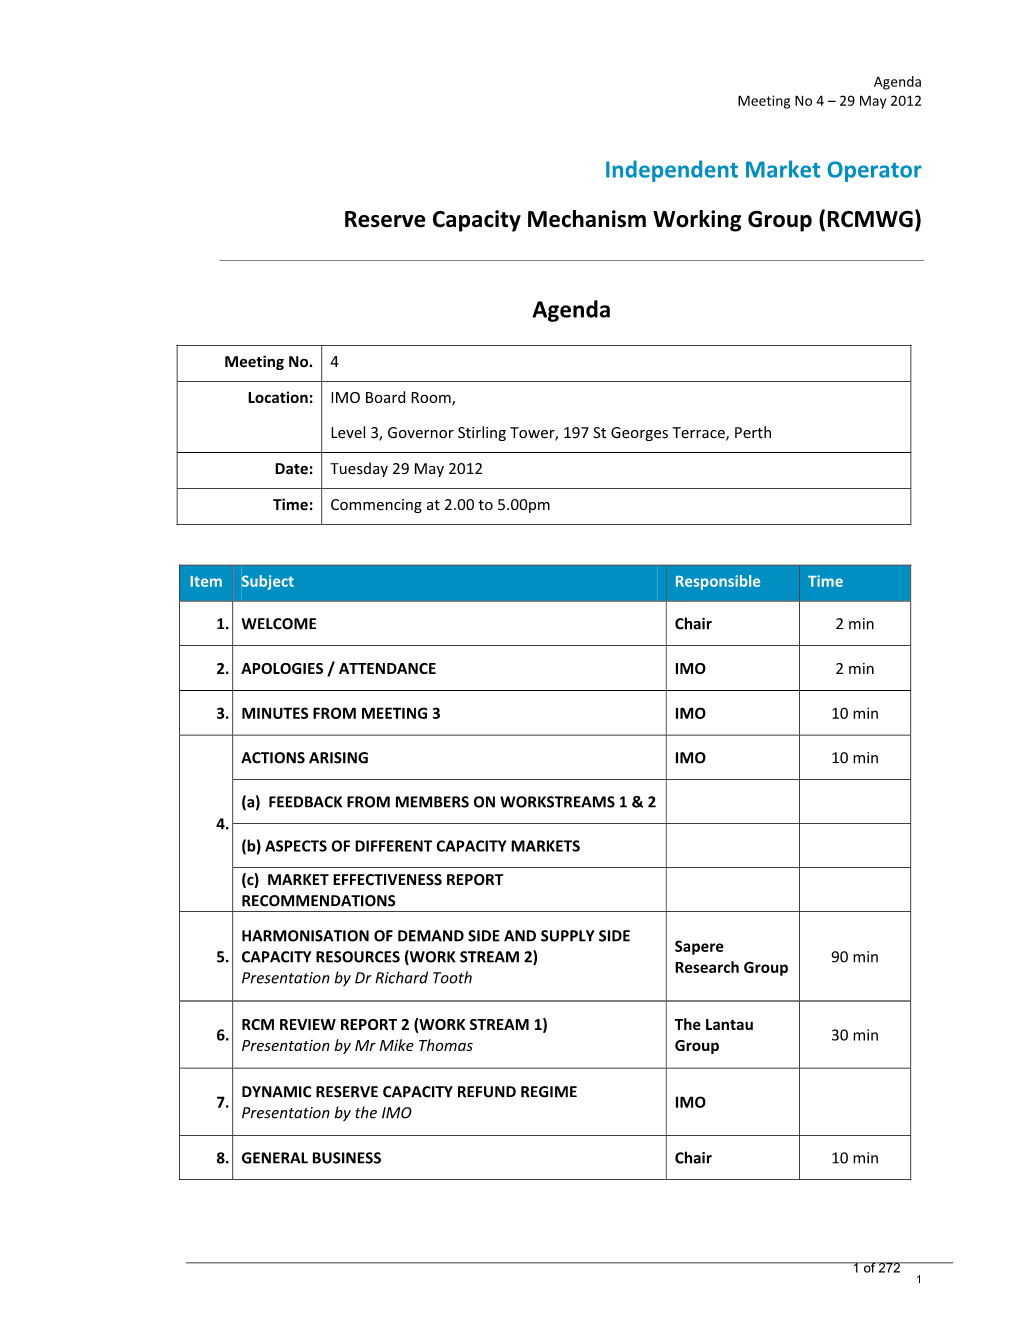 Independent Market Operator Reserve Capacity Mechanism Working Group (RCMWG)